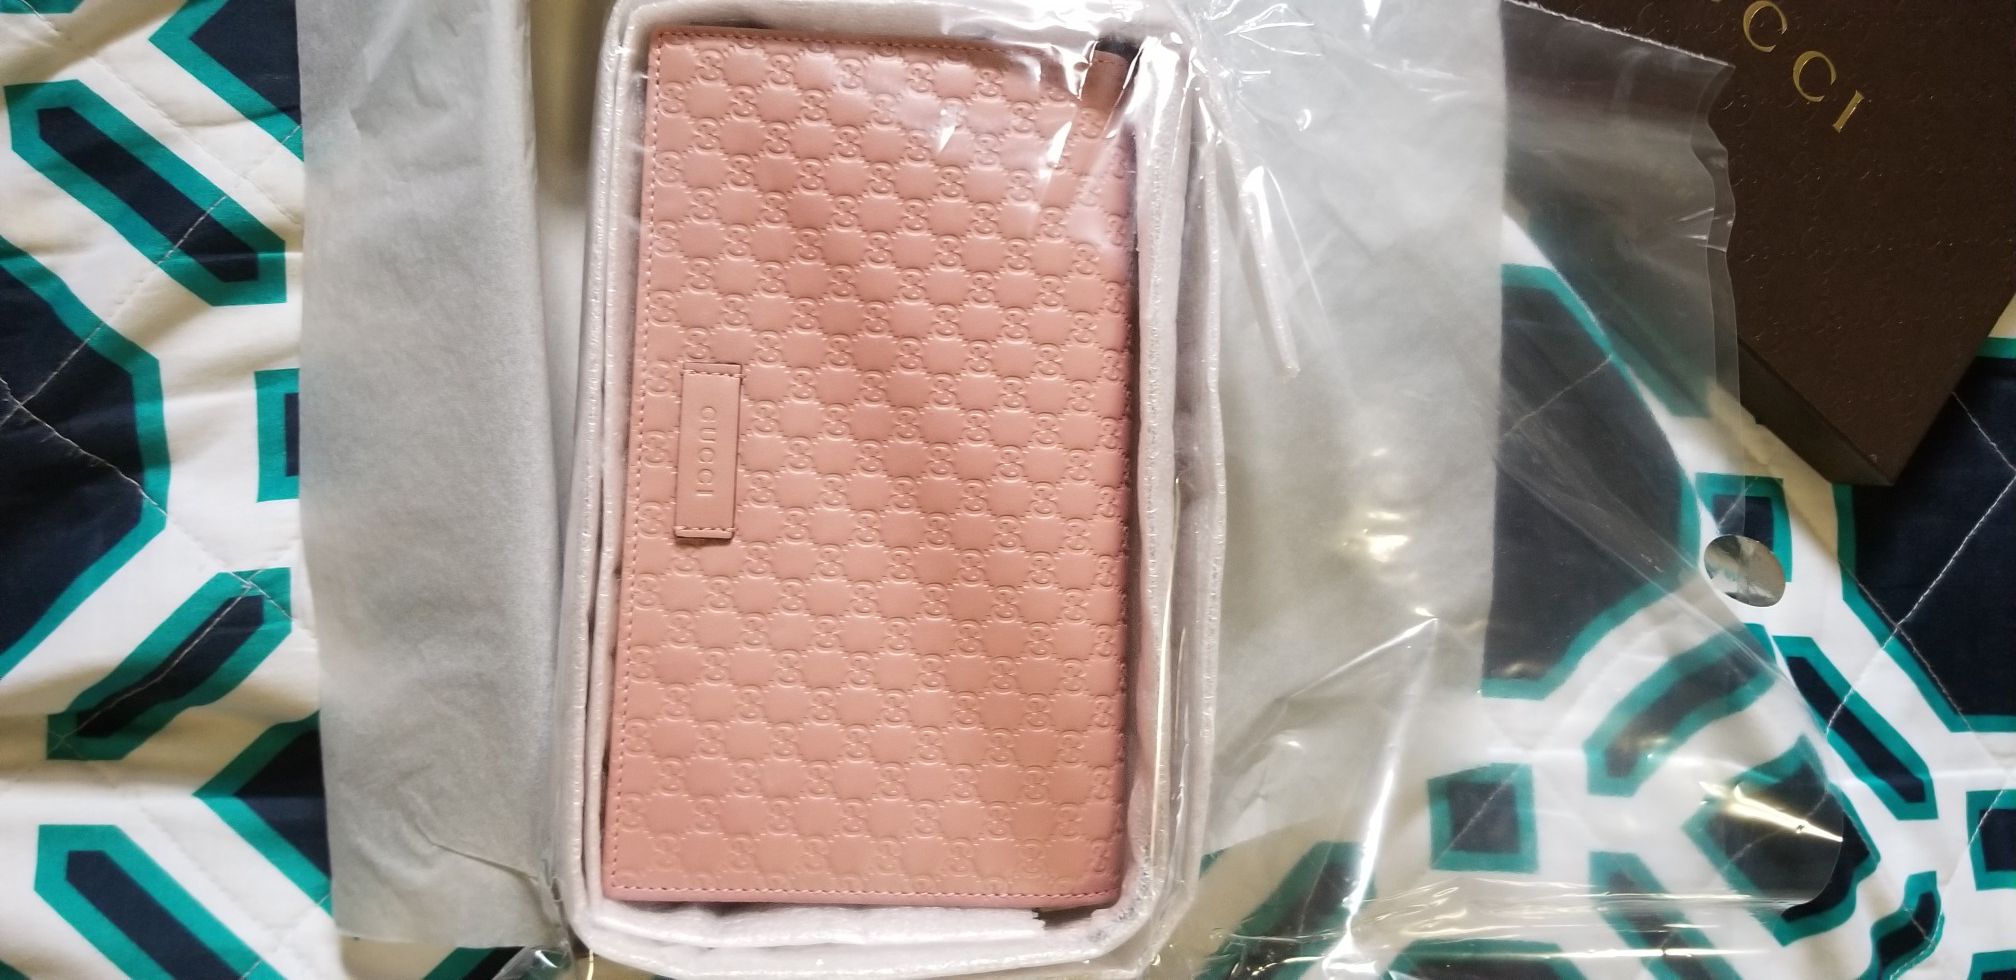 Authentic Gucci bag with Receipt